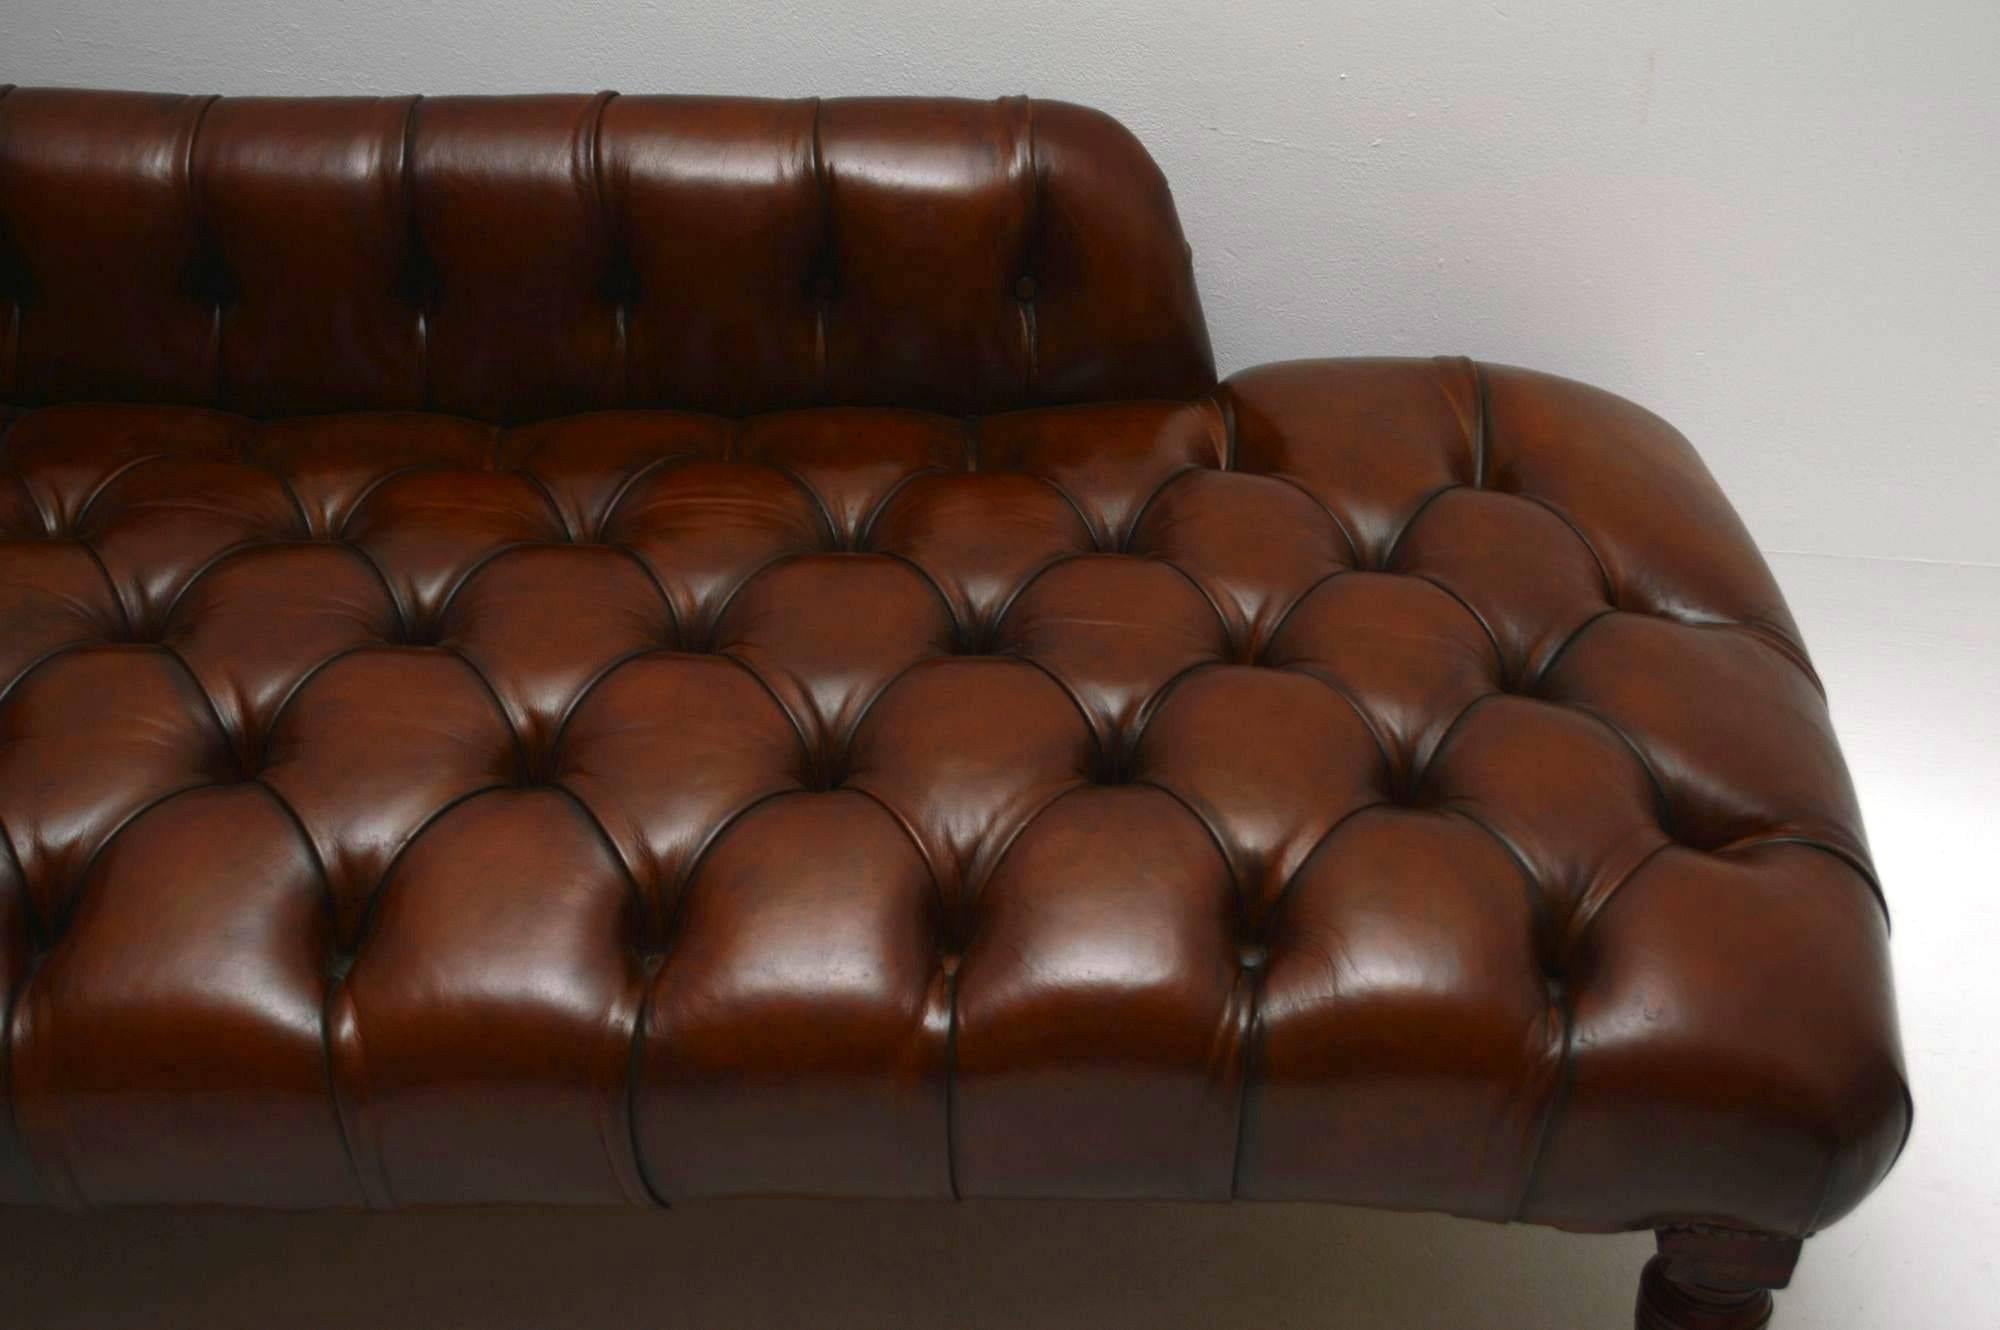 This is an original Victorian chaise lounge that has been completely re-upholstered in deep buttoned leather, then hand colored and antiqued by a leather specialist. The mahogany legs are turned & reeded with original brass casters. This chaise has